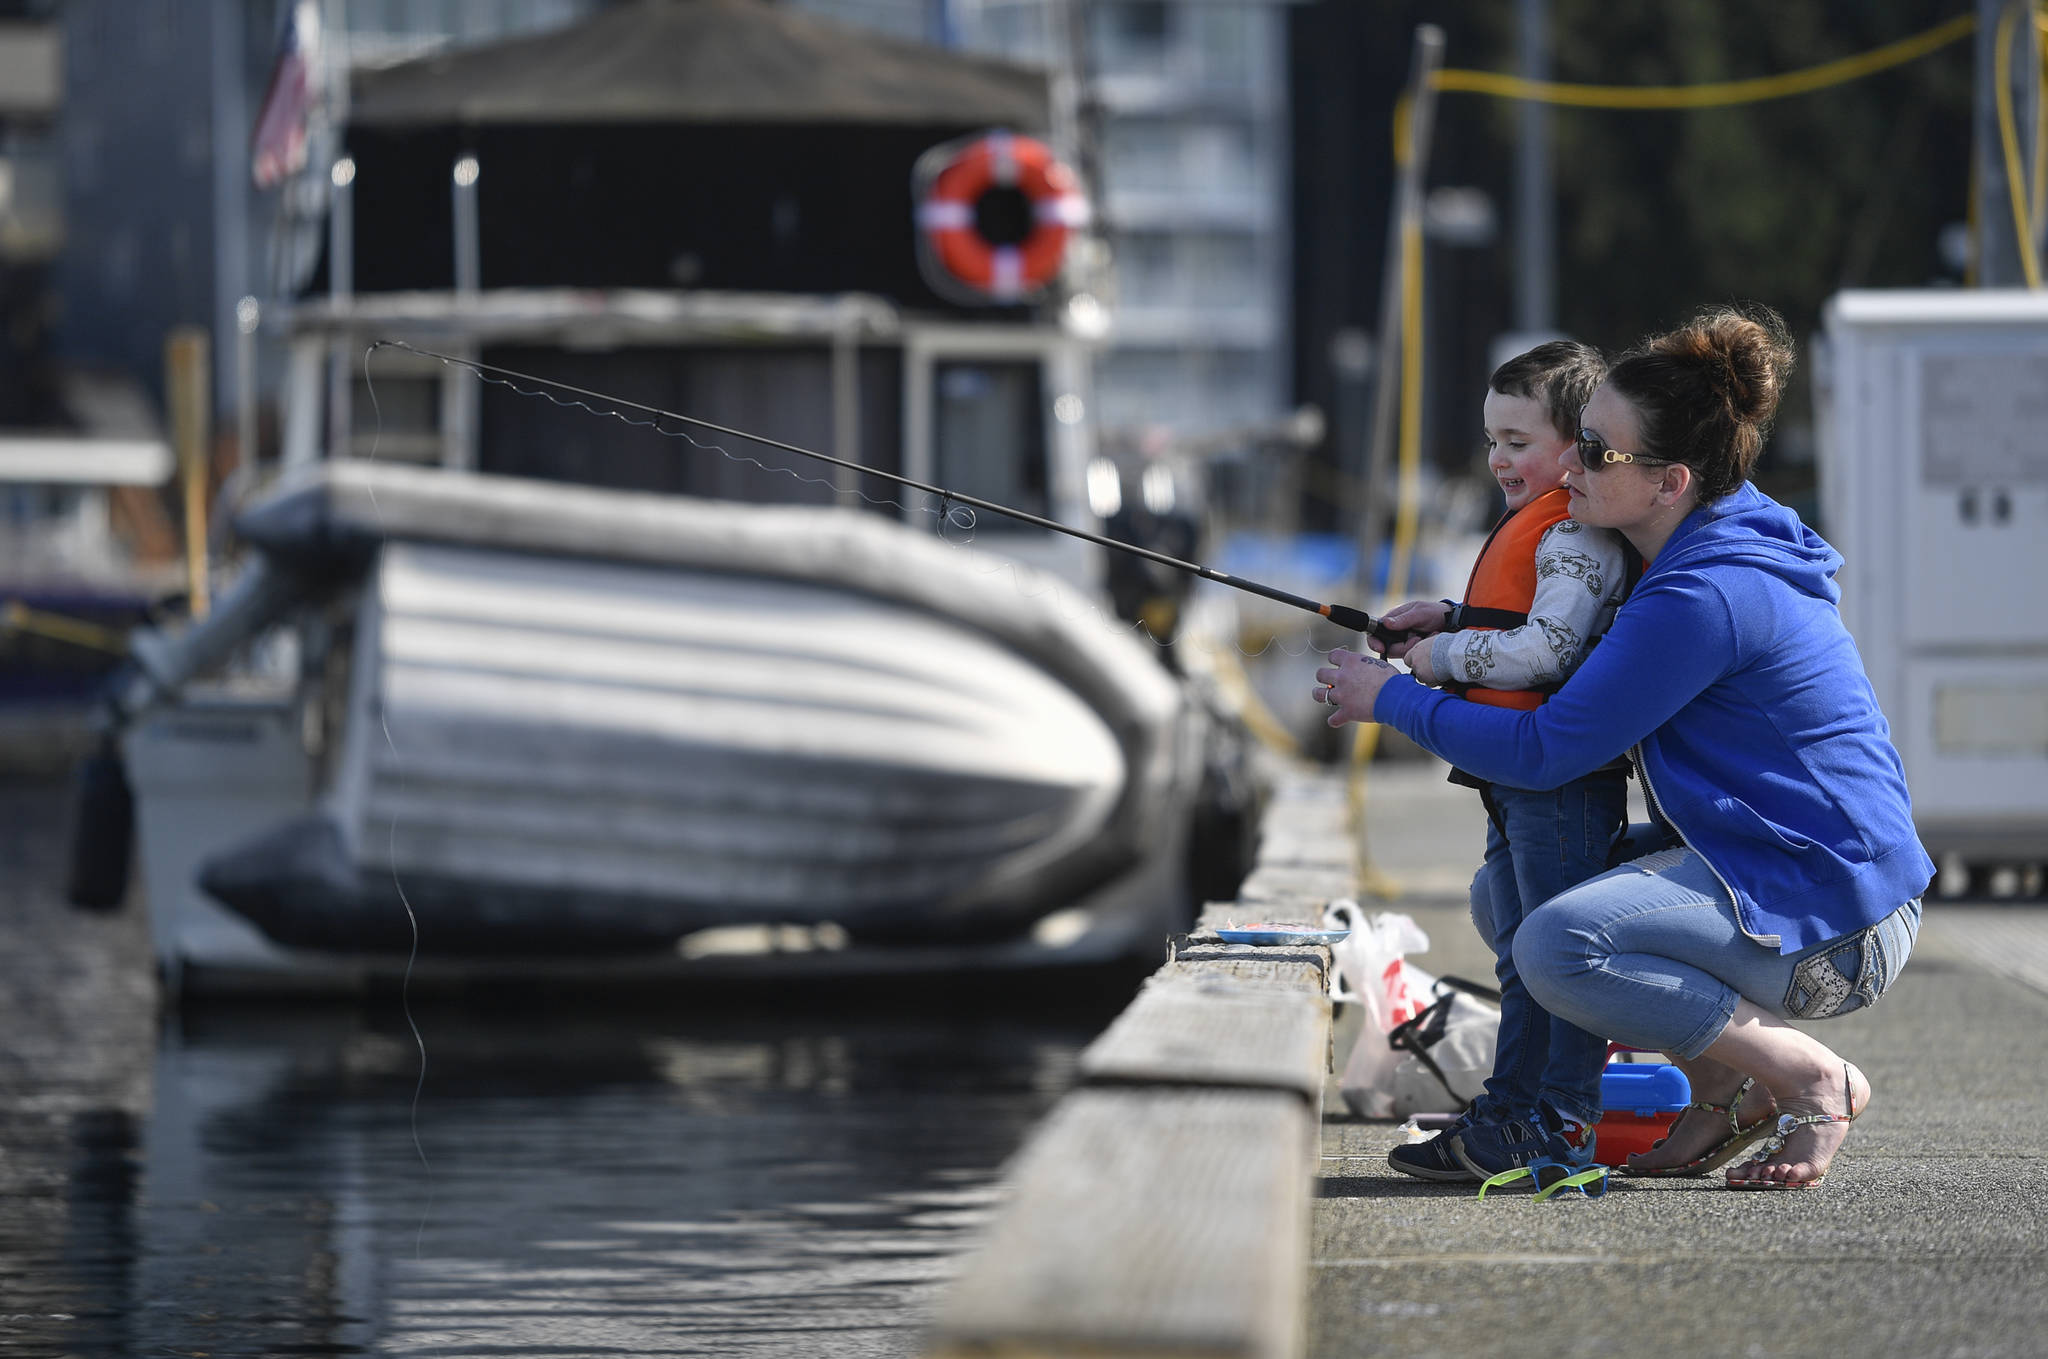 Taylor Kesterson fishes with her son, Malakai, 5, at the Don D. Statter Memorial Boat Harbor in Auke Bay on Tuesday, April 2, 2019. Kesterson said she fished from the dock as a child and wanted her son to have the same experience. (Michael Penn | Juneau Empire)